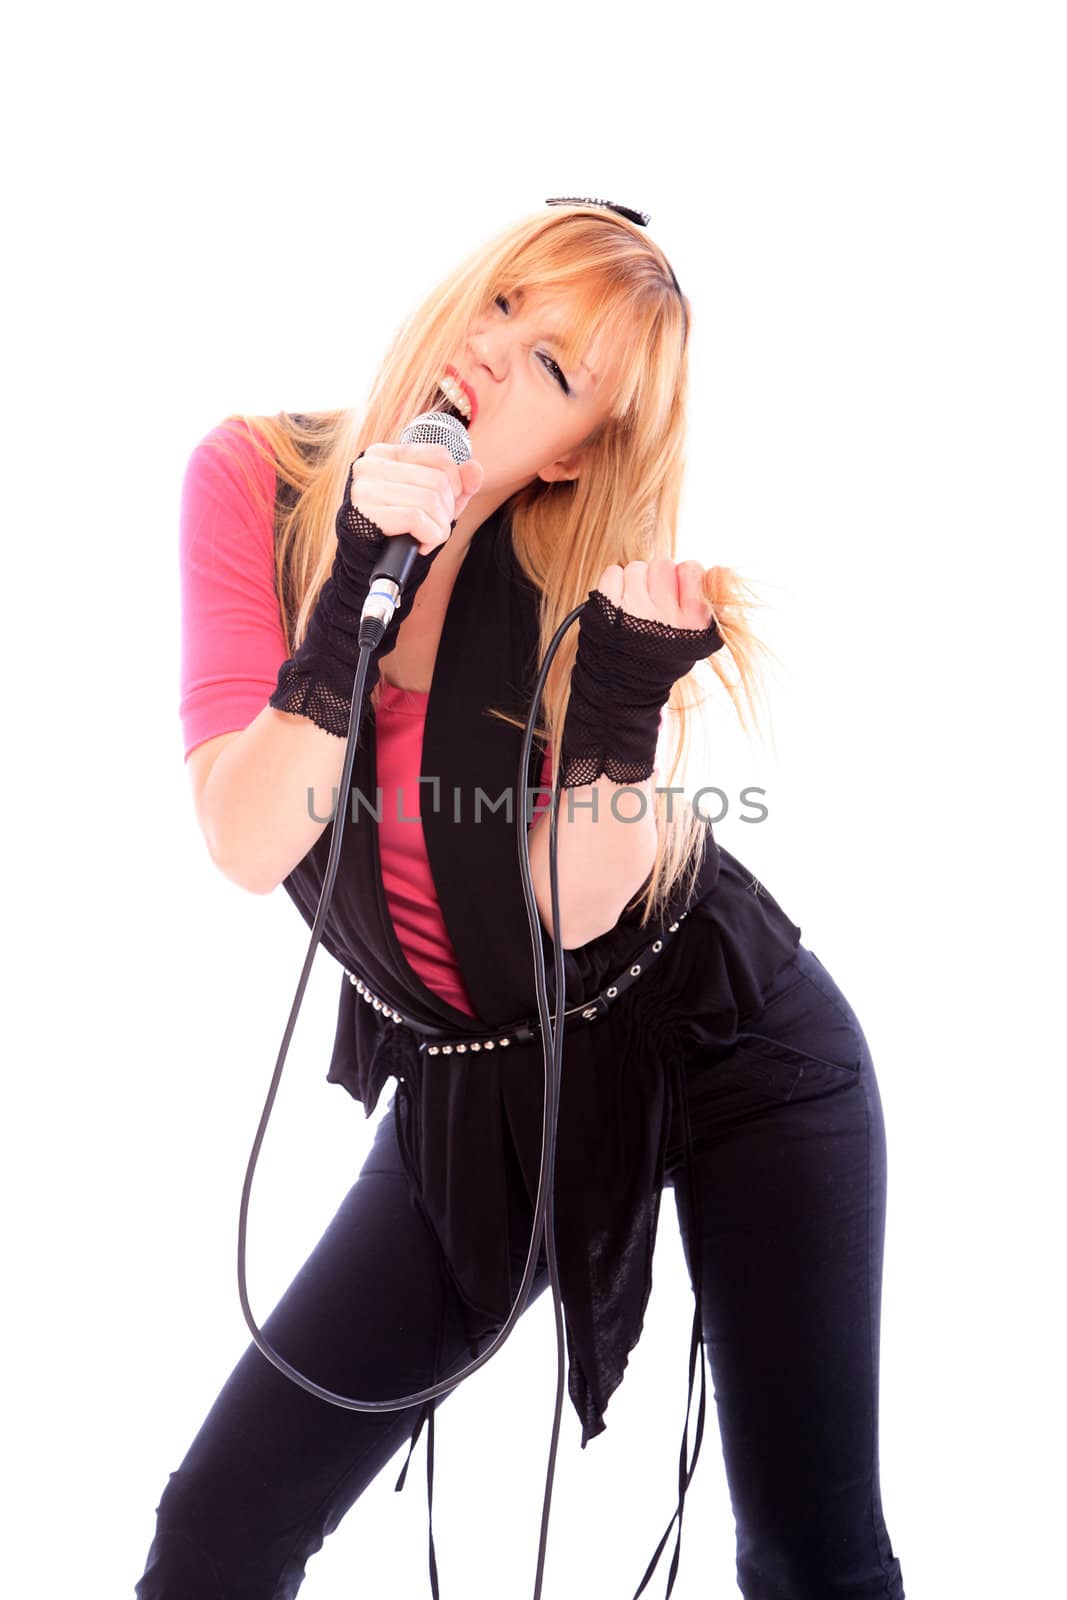 Portrait of female rock singer with microphone in hand